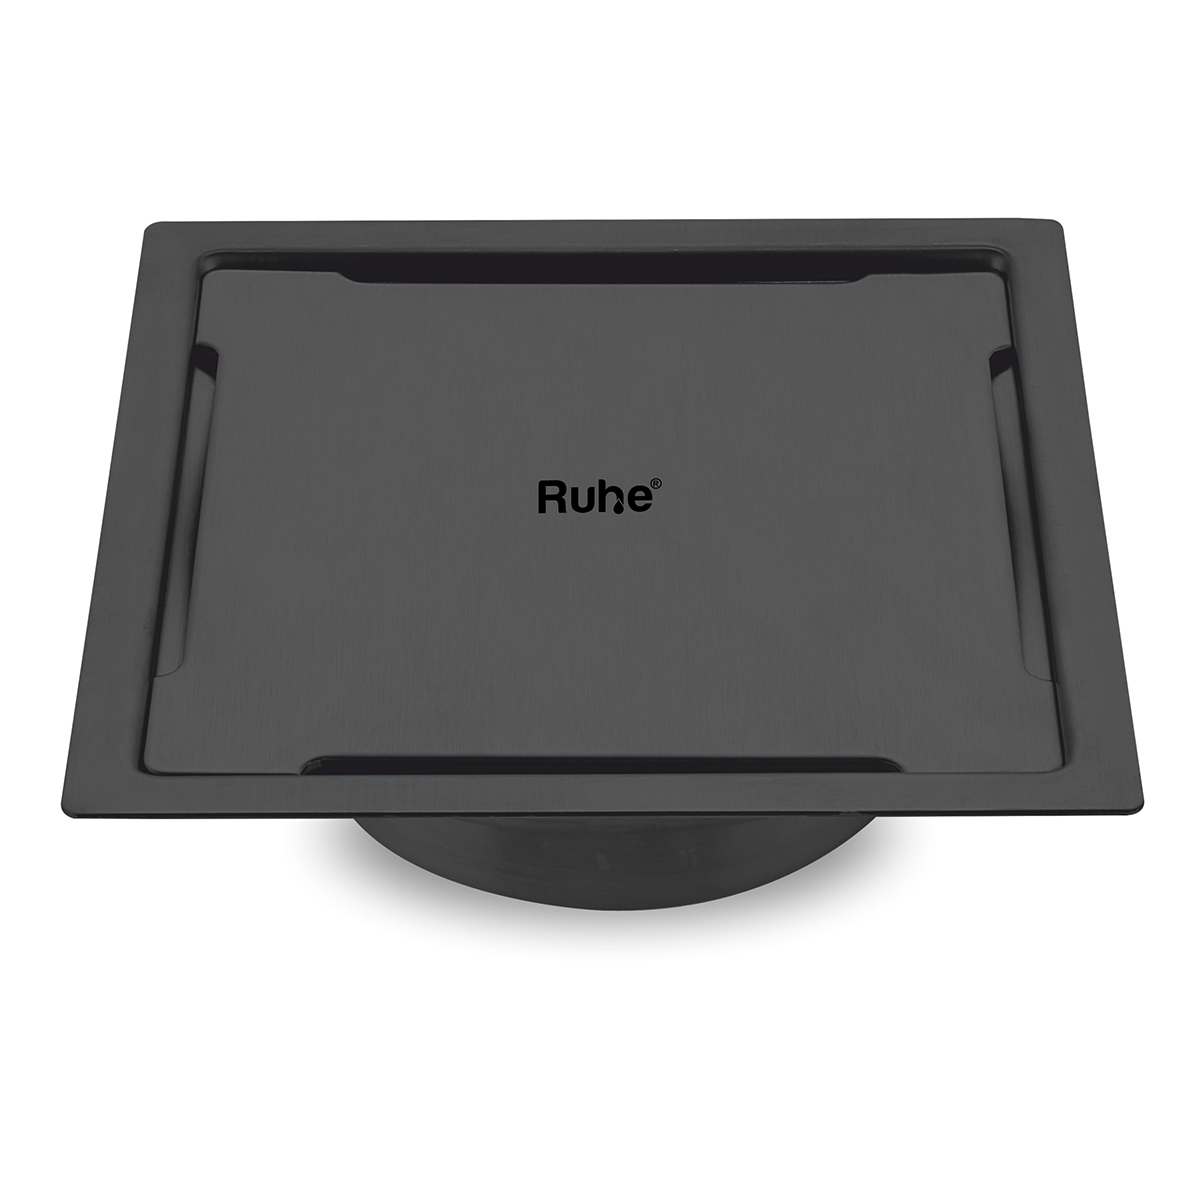 Diamond Square Flat Cut Floor Drain in Black PVD Coating (6 x 6 Inches) - by Ruhe®